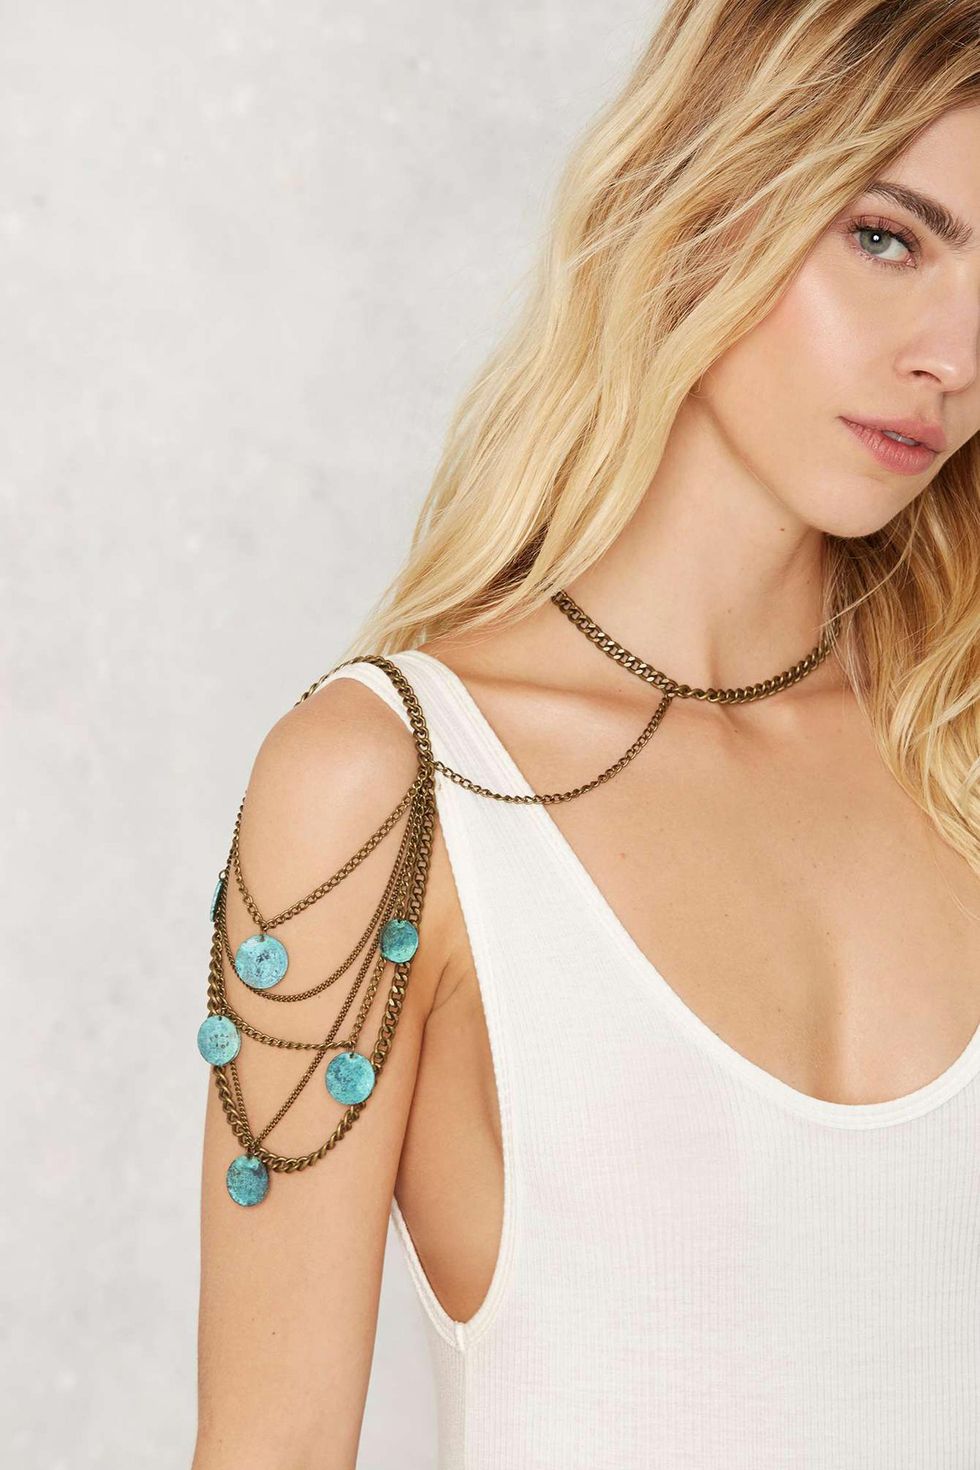 Best Body Chains and Body Necklaces - How to Wear Body Jewelry